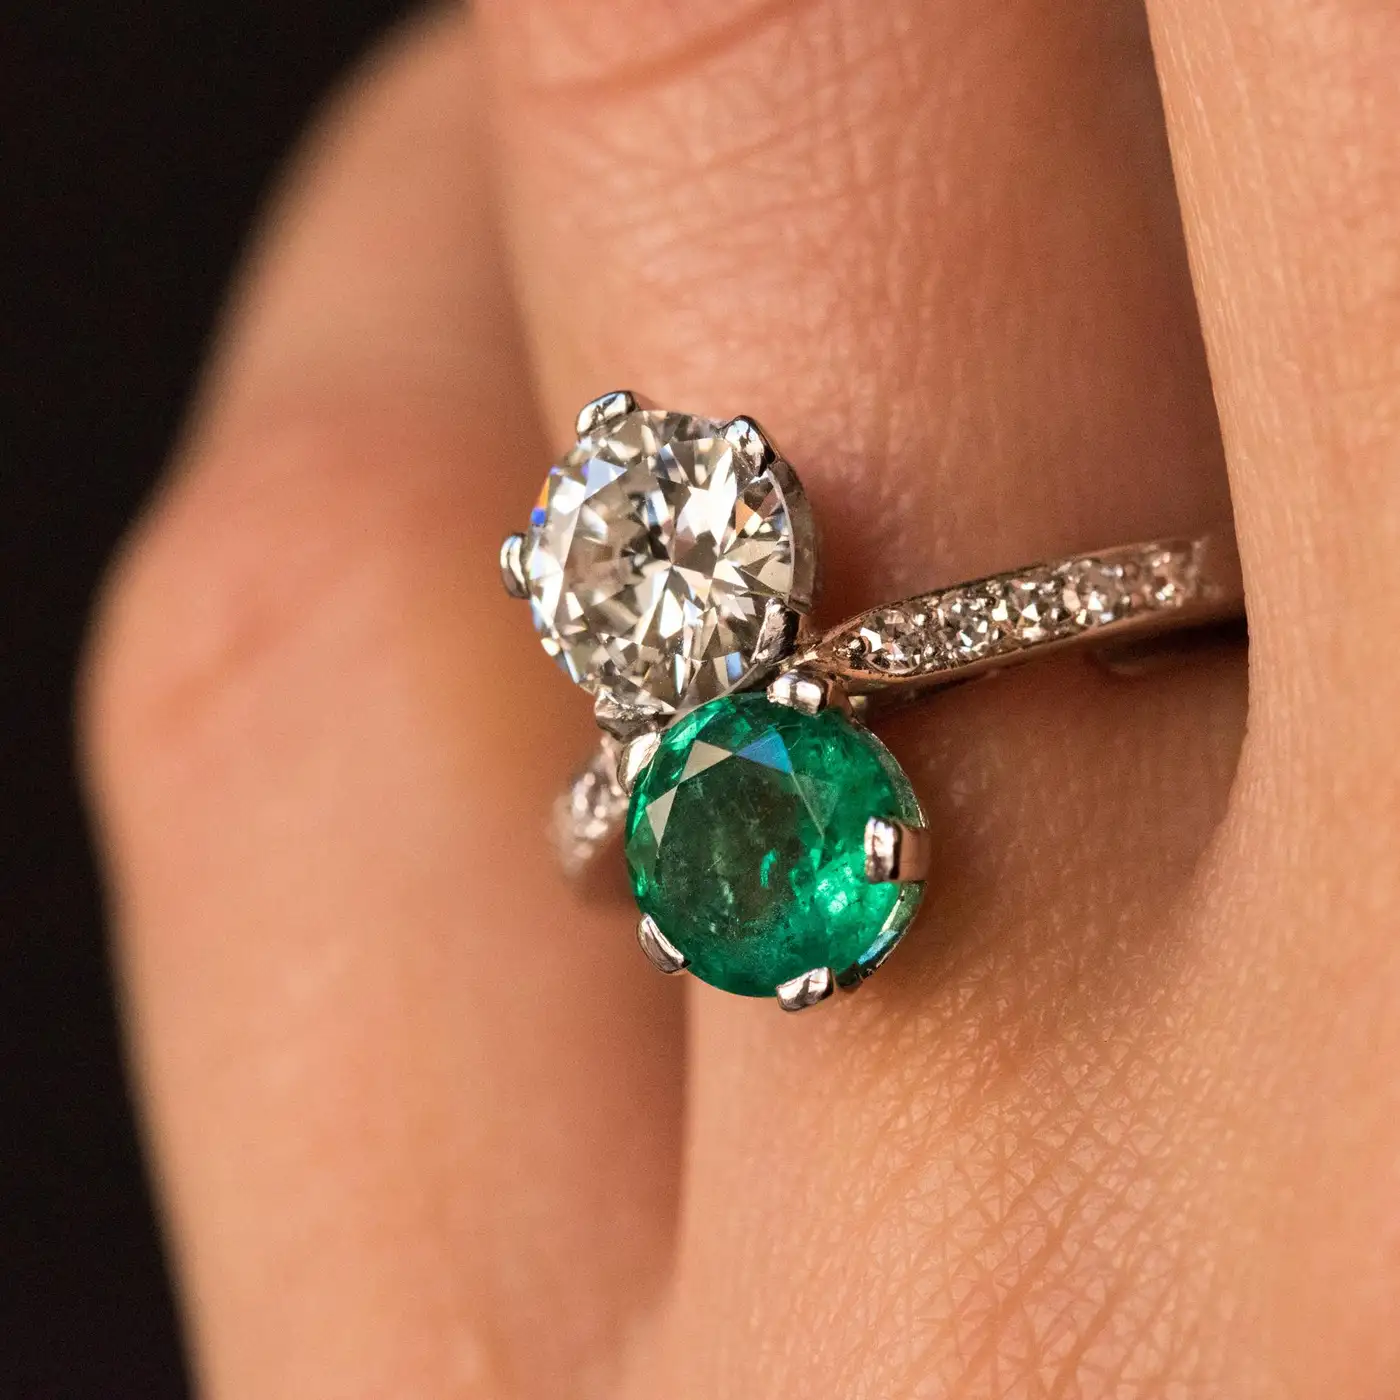 1930s-French-Platinum-Art-Deco-Emerald-Diamond-You-and-Me-Ring-13.webp